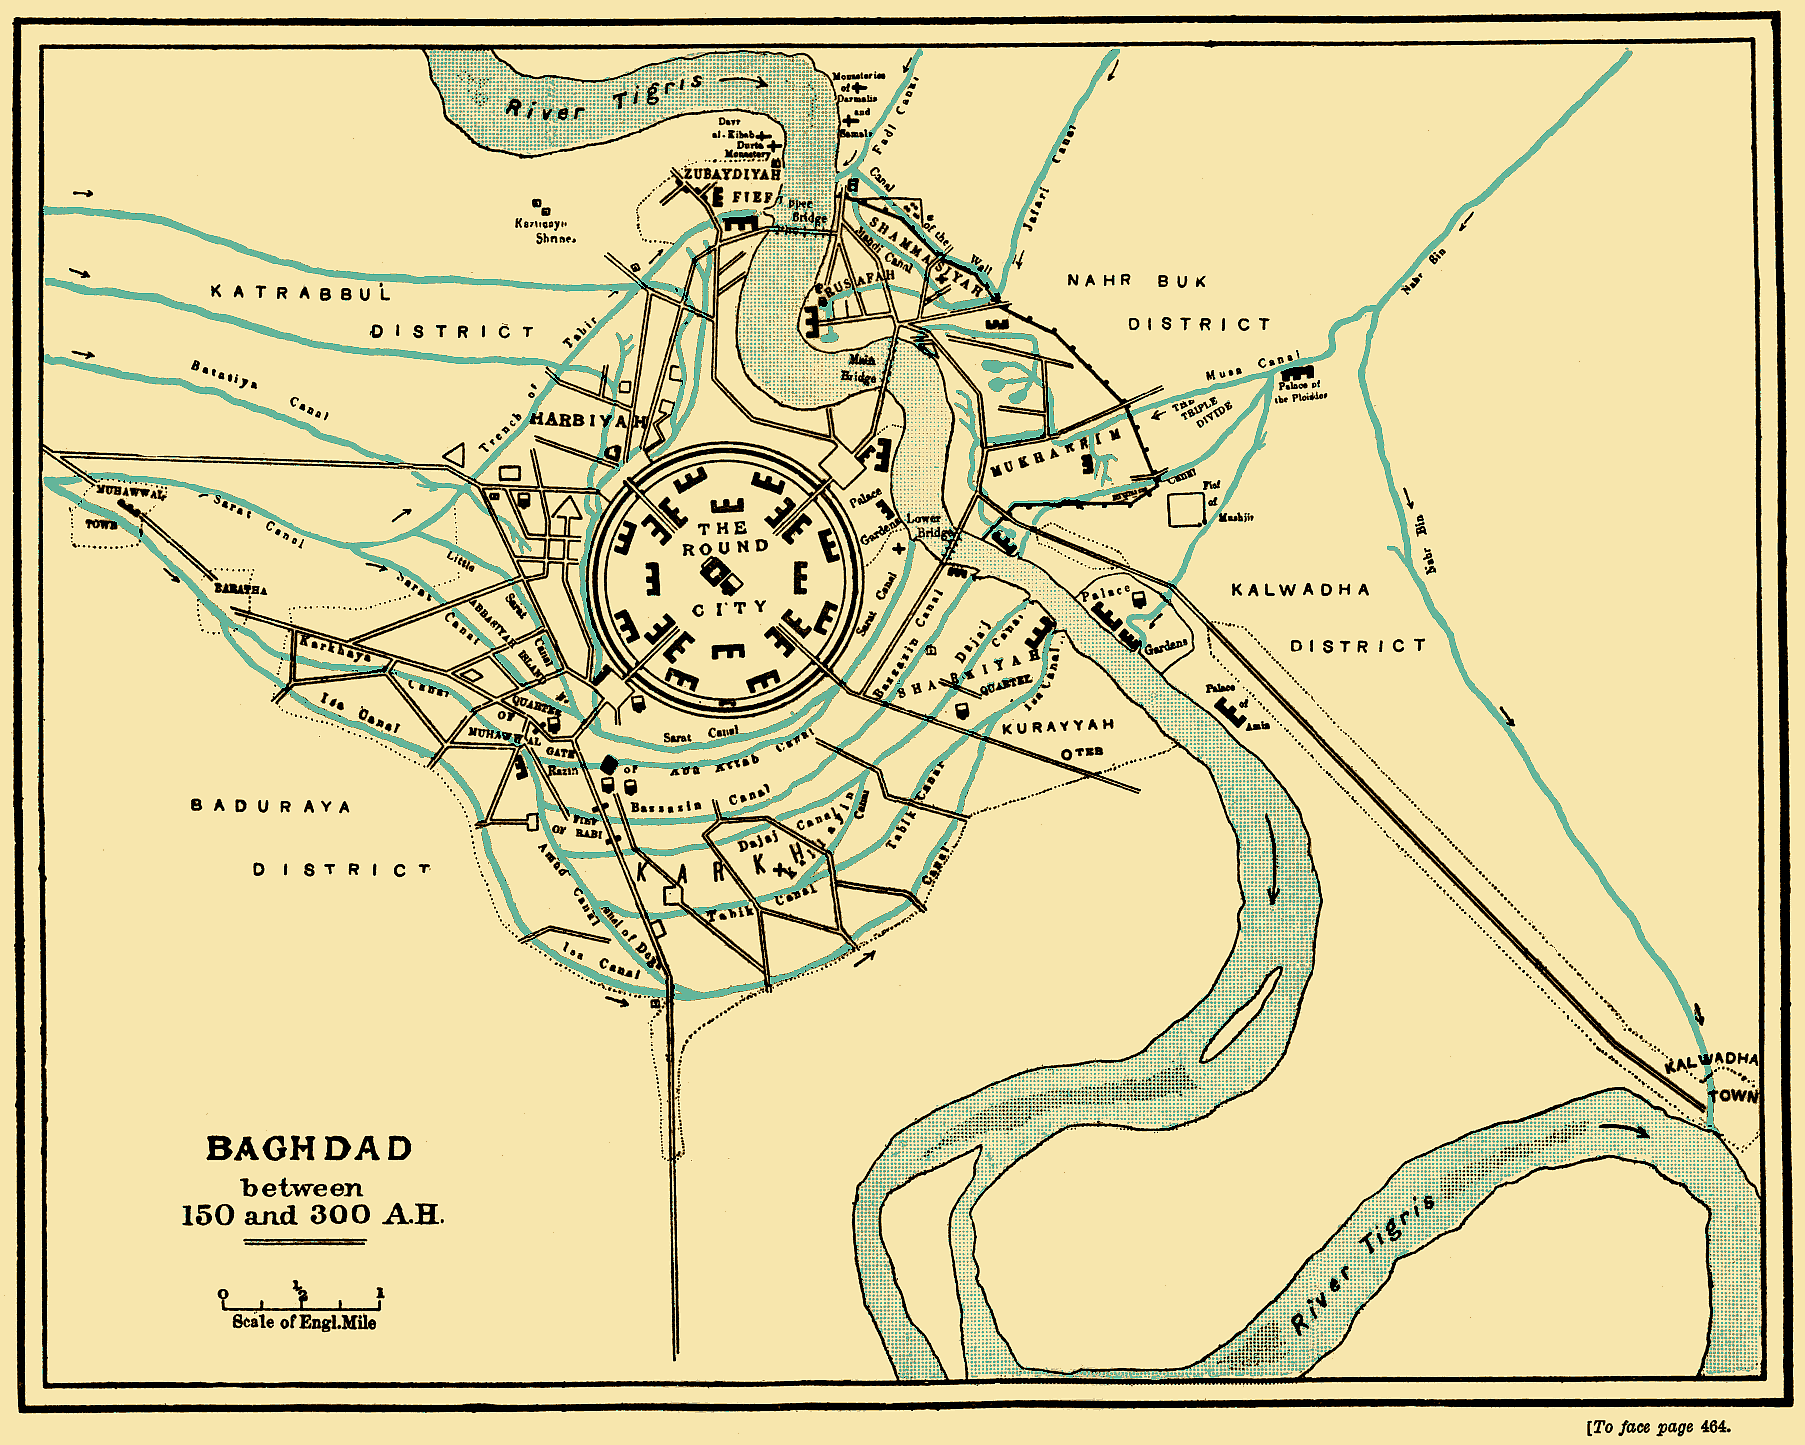 Baghdad, Crossroads of the Universe